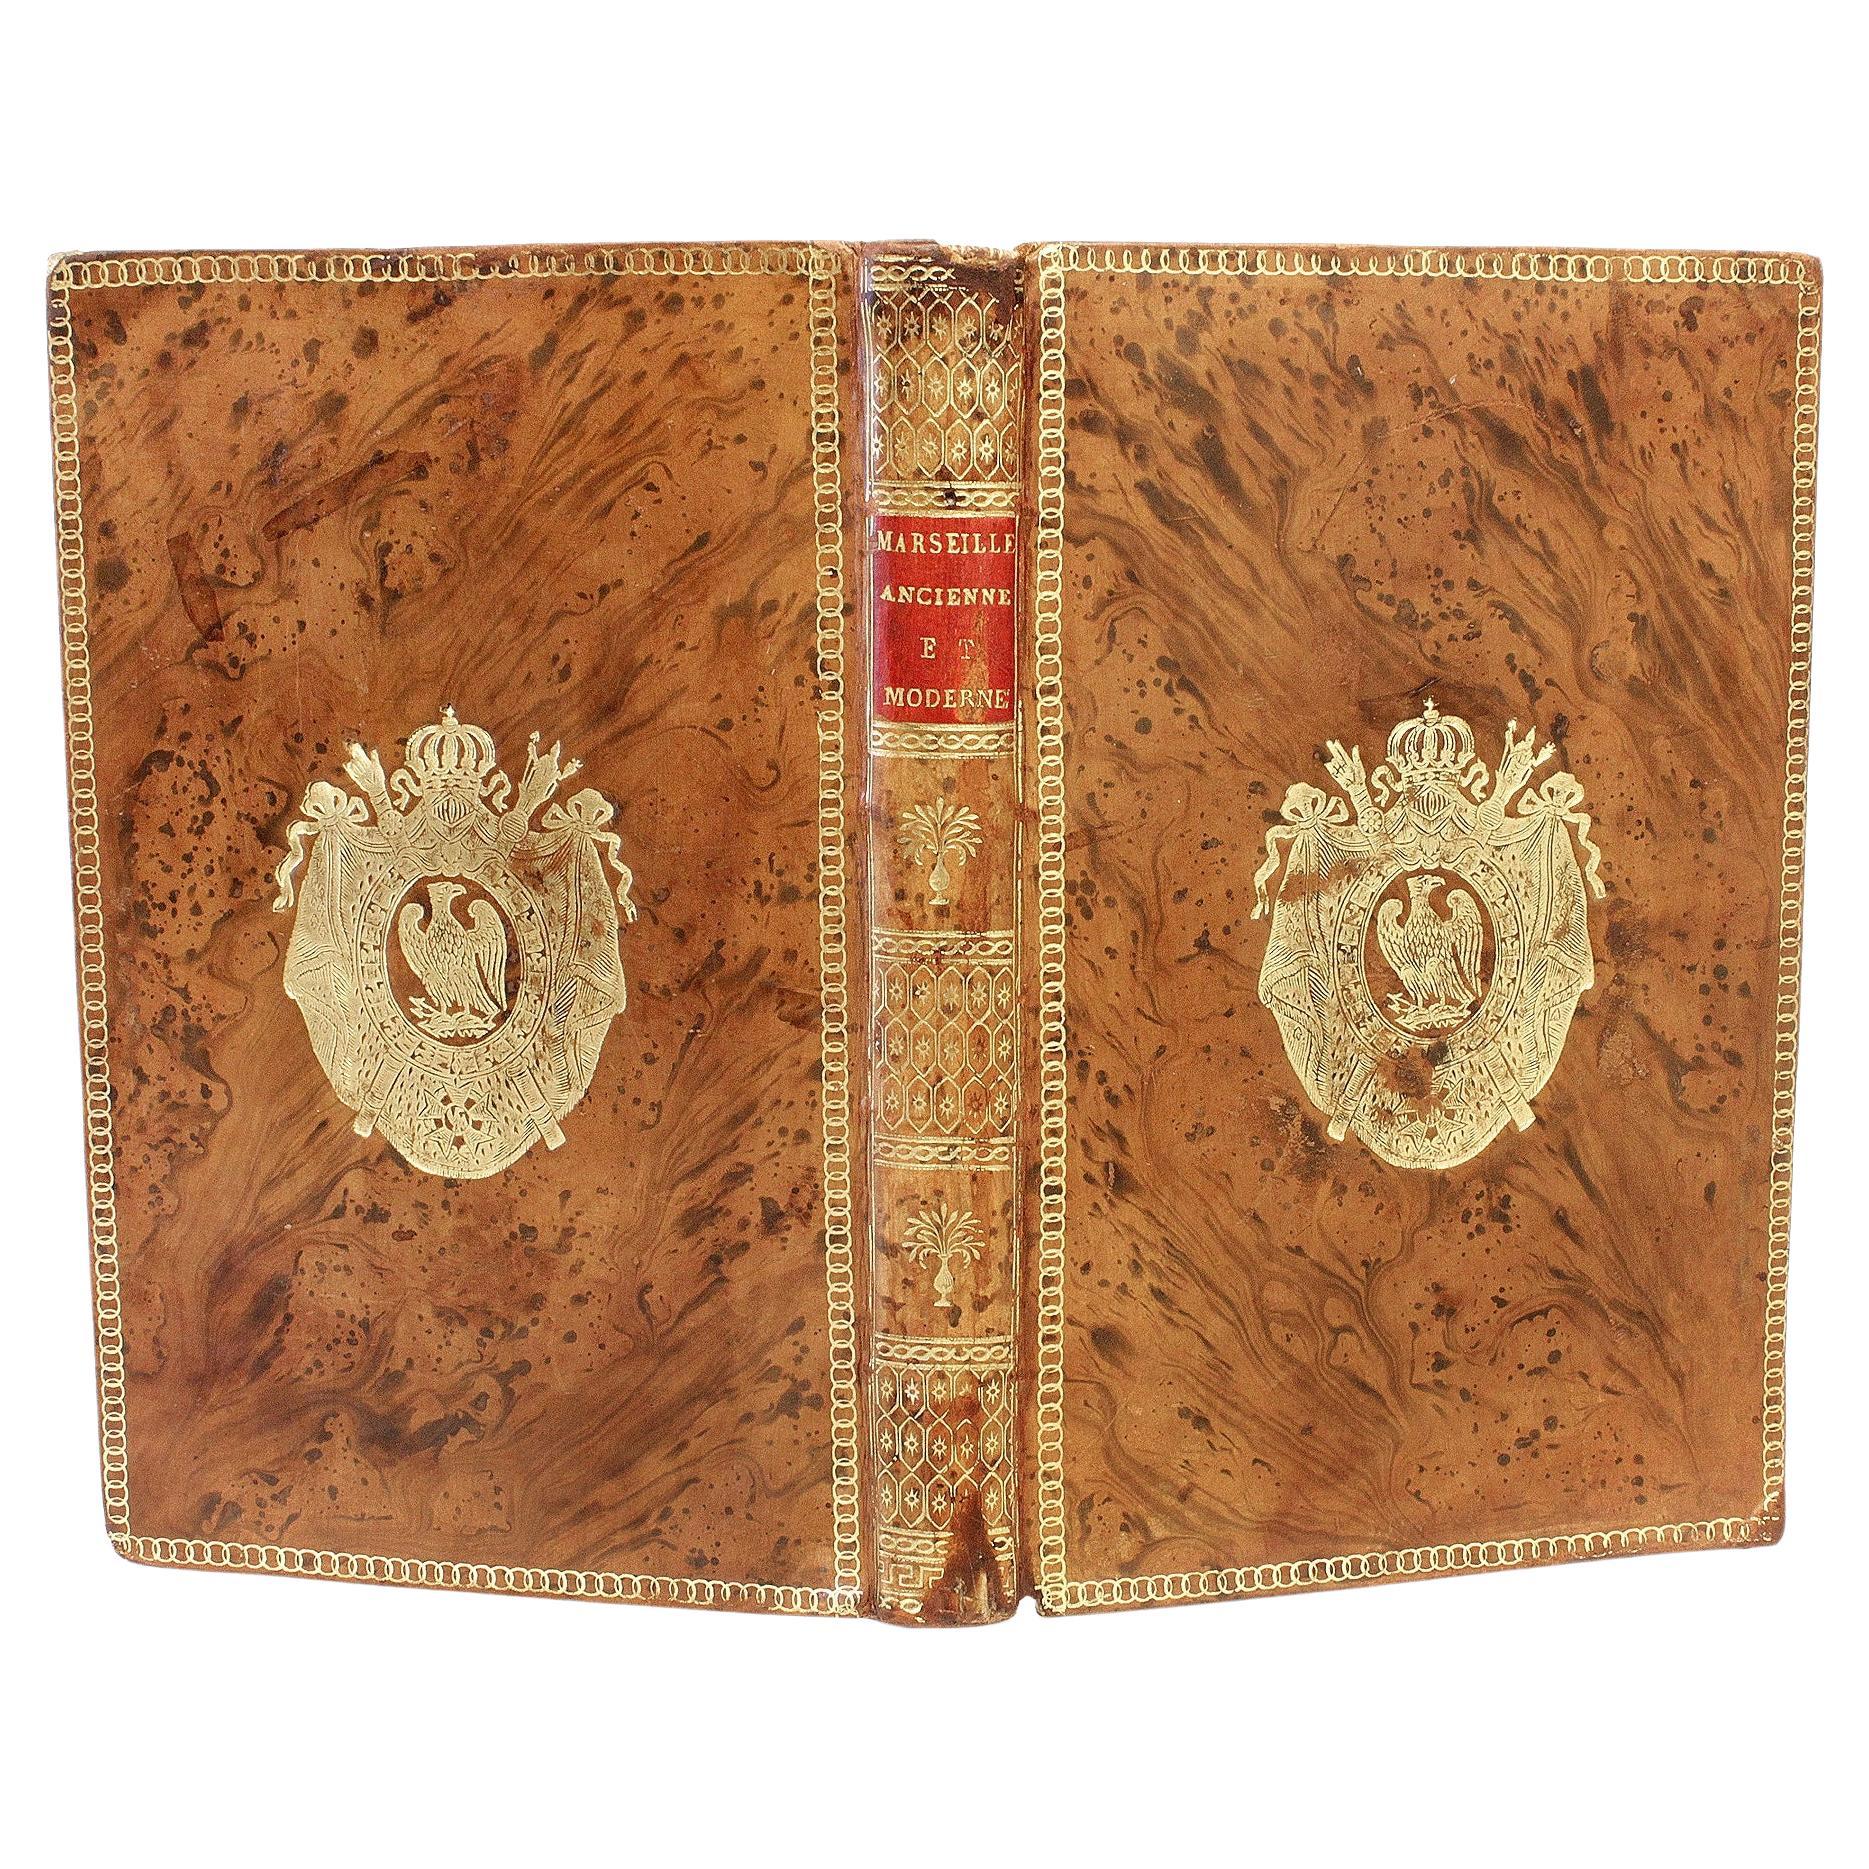 Marseille Ancienne et Moderne - FIRST ED WITH THE GILT ARMS OF NAPOLEON - 1786 For Sale